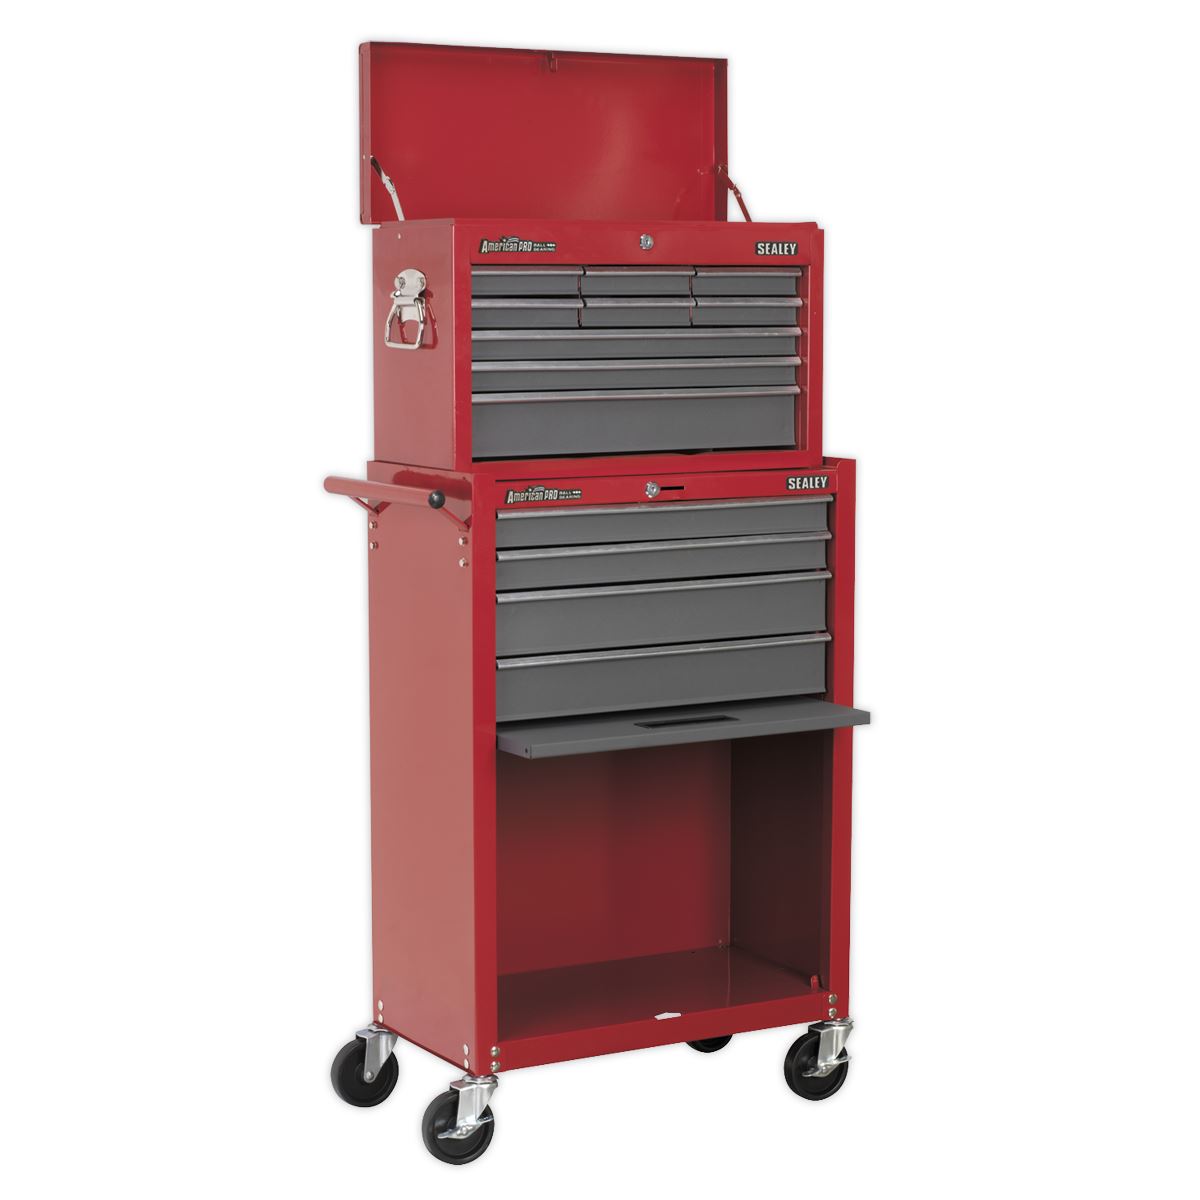 Sealey American Pro Topchest & Rollcab Combination 13 Drawer with Ball-Bearing Slides - Red/Grey